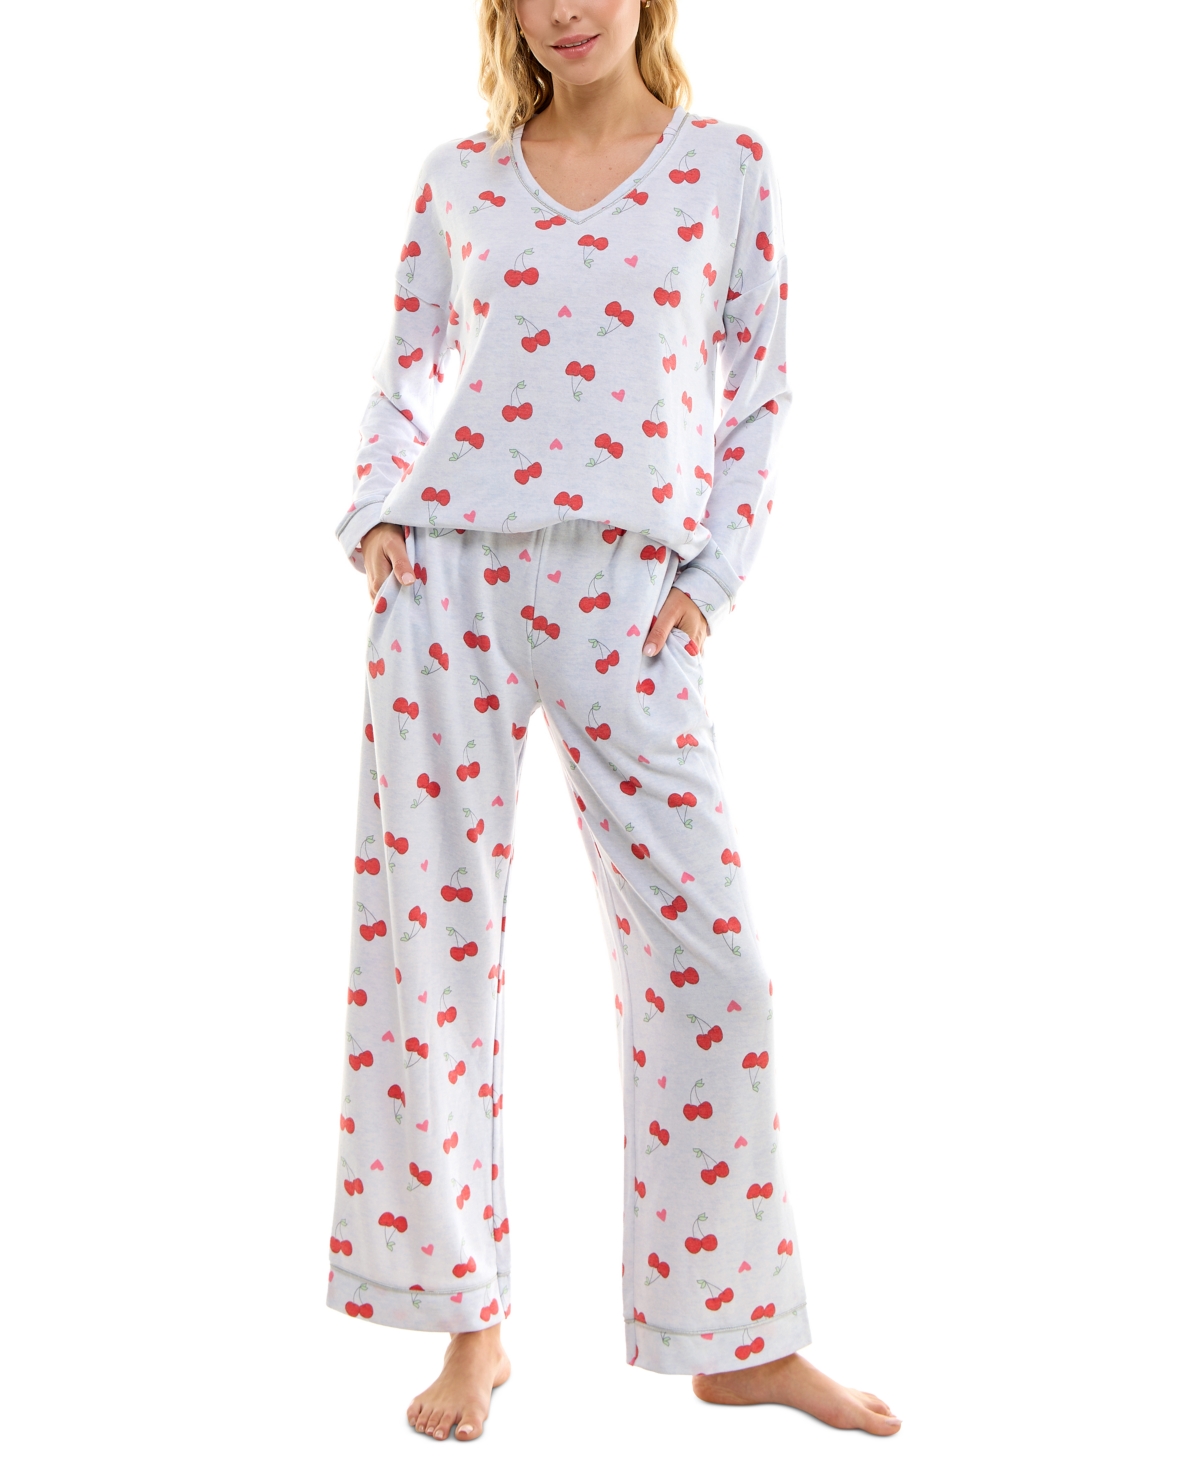 Women's 2-Pc. Printed Butter Knit Pajamas Set - Heart Out